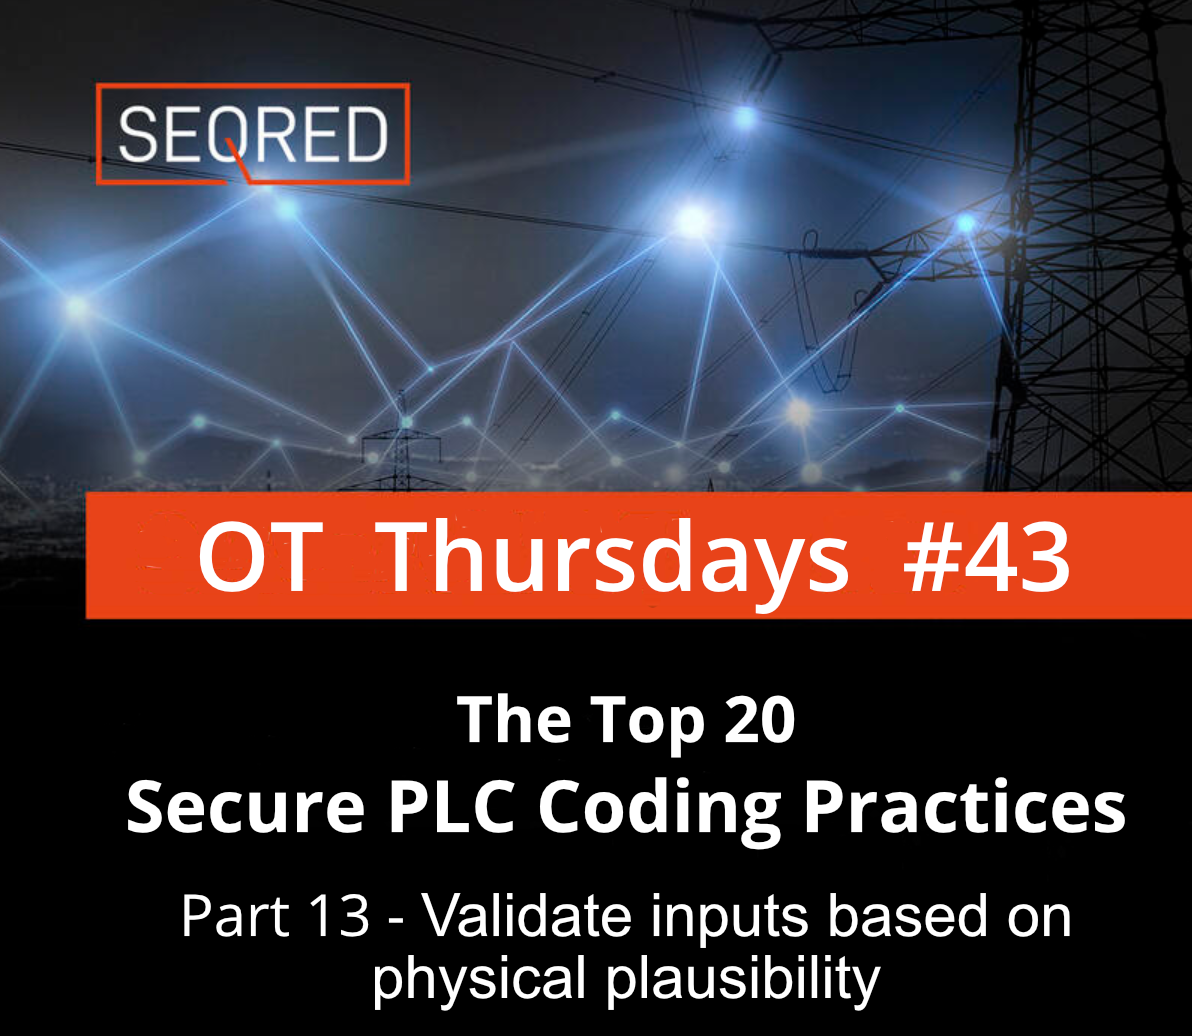 The Top 20 Secure PLC Coding Practices. Part 14 - Disable unneeded / unused communication ports and protocols